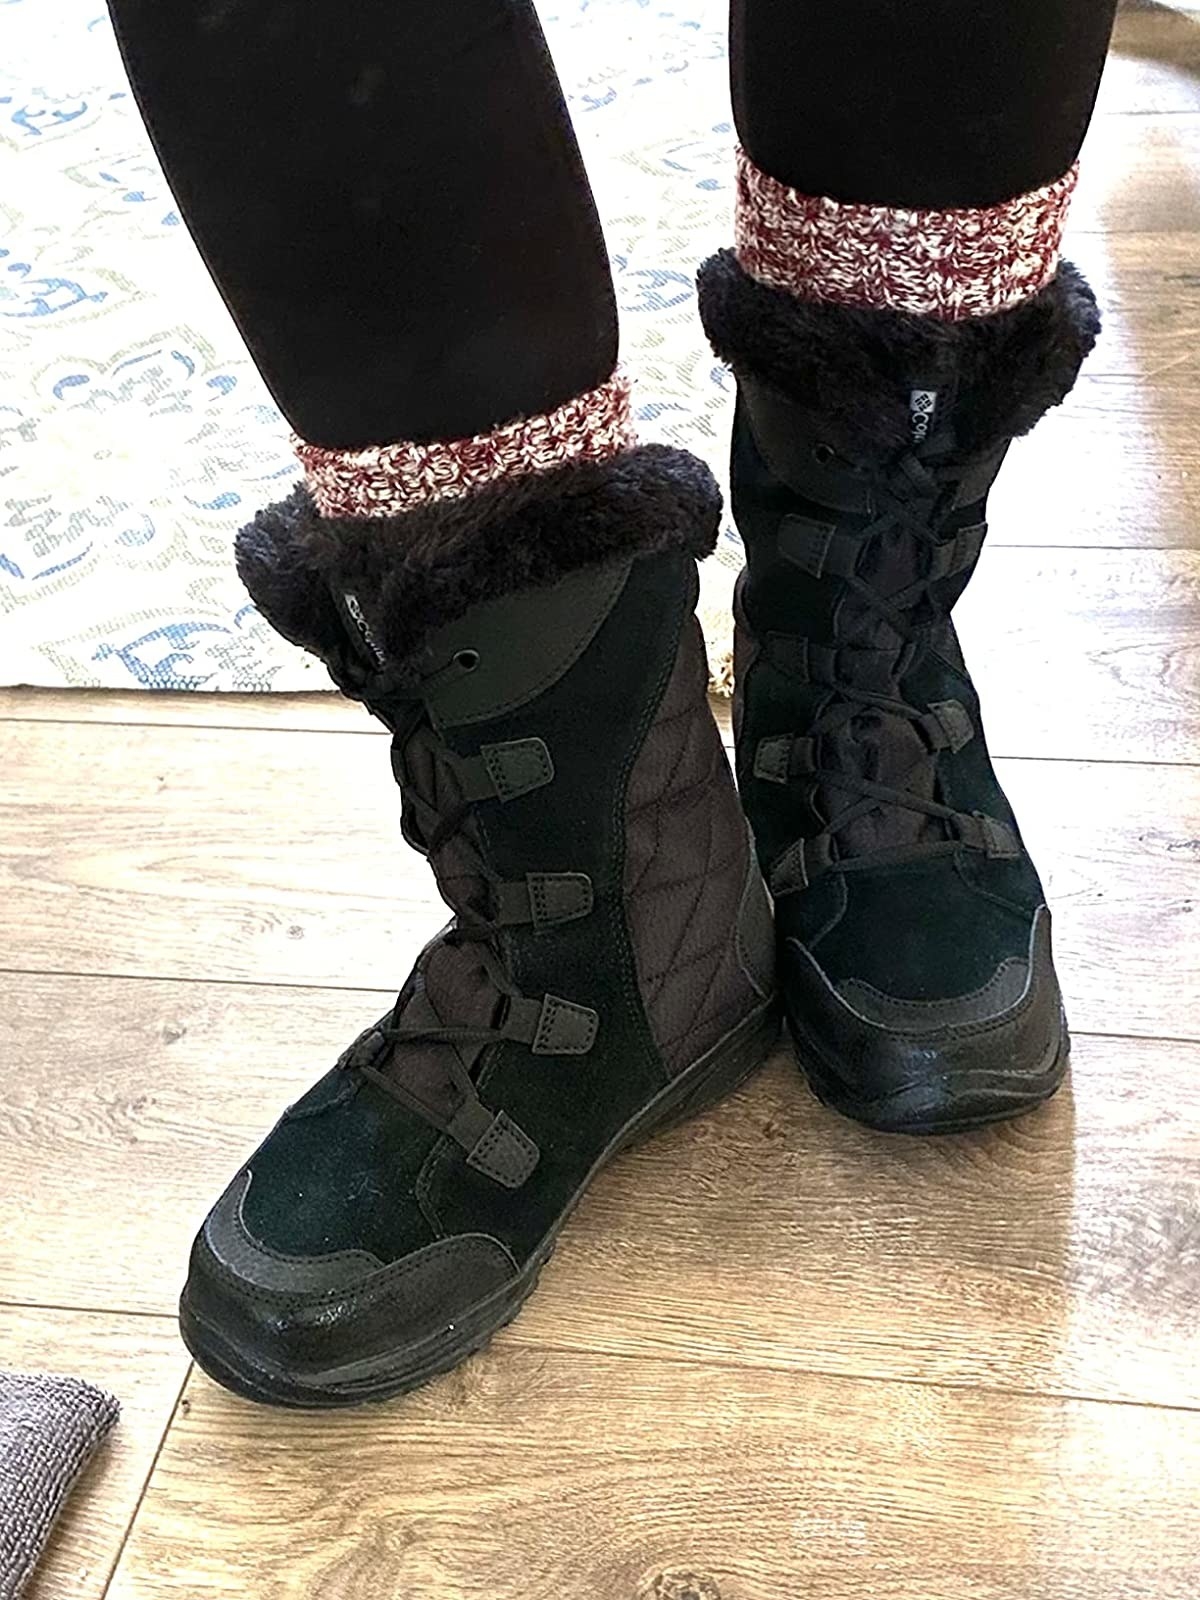 Reviewer wearing back snow boots